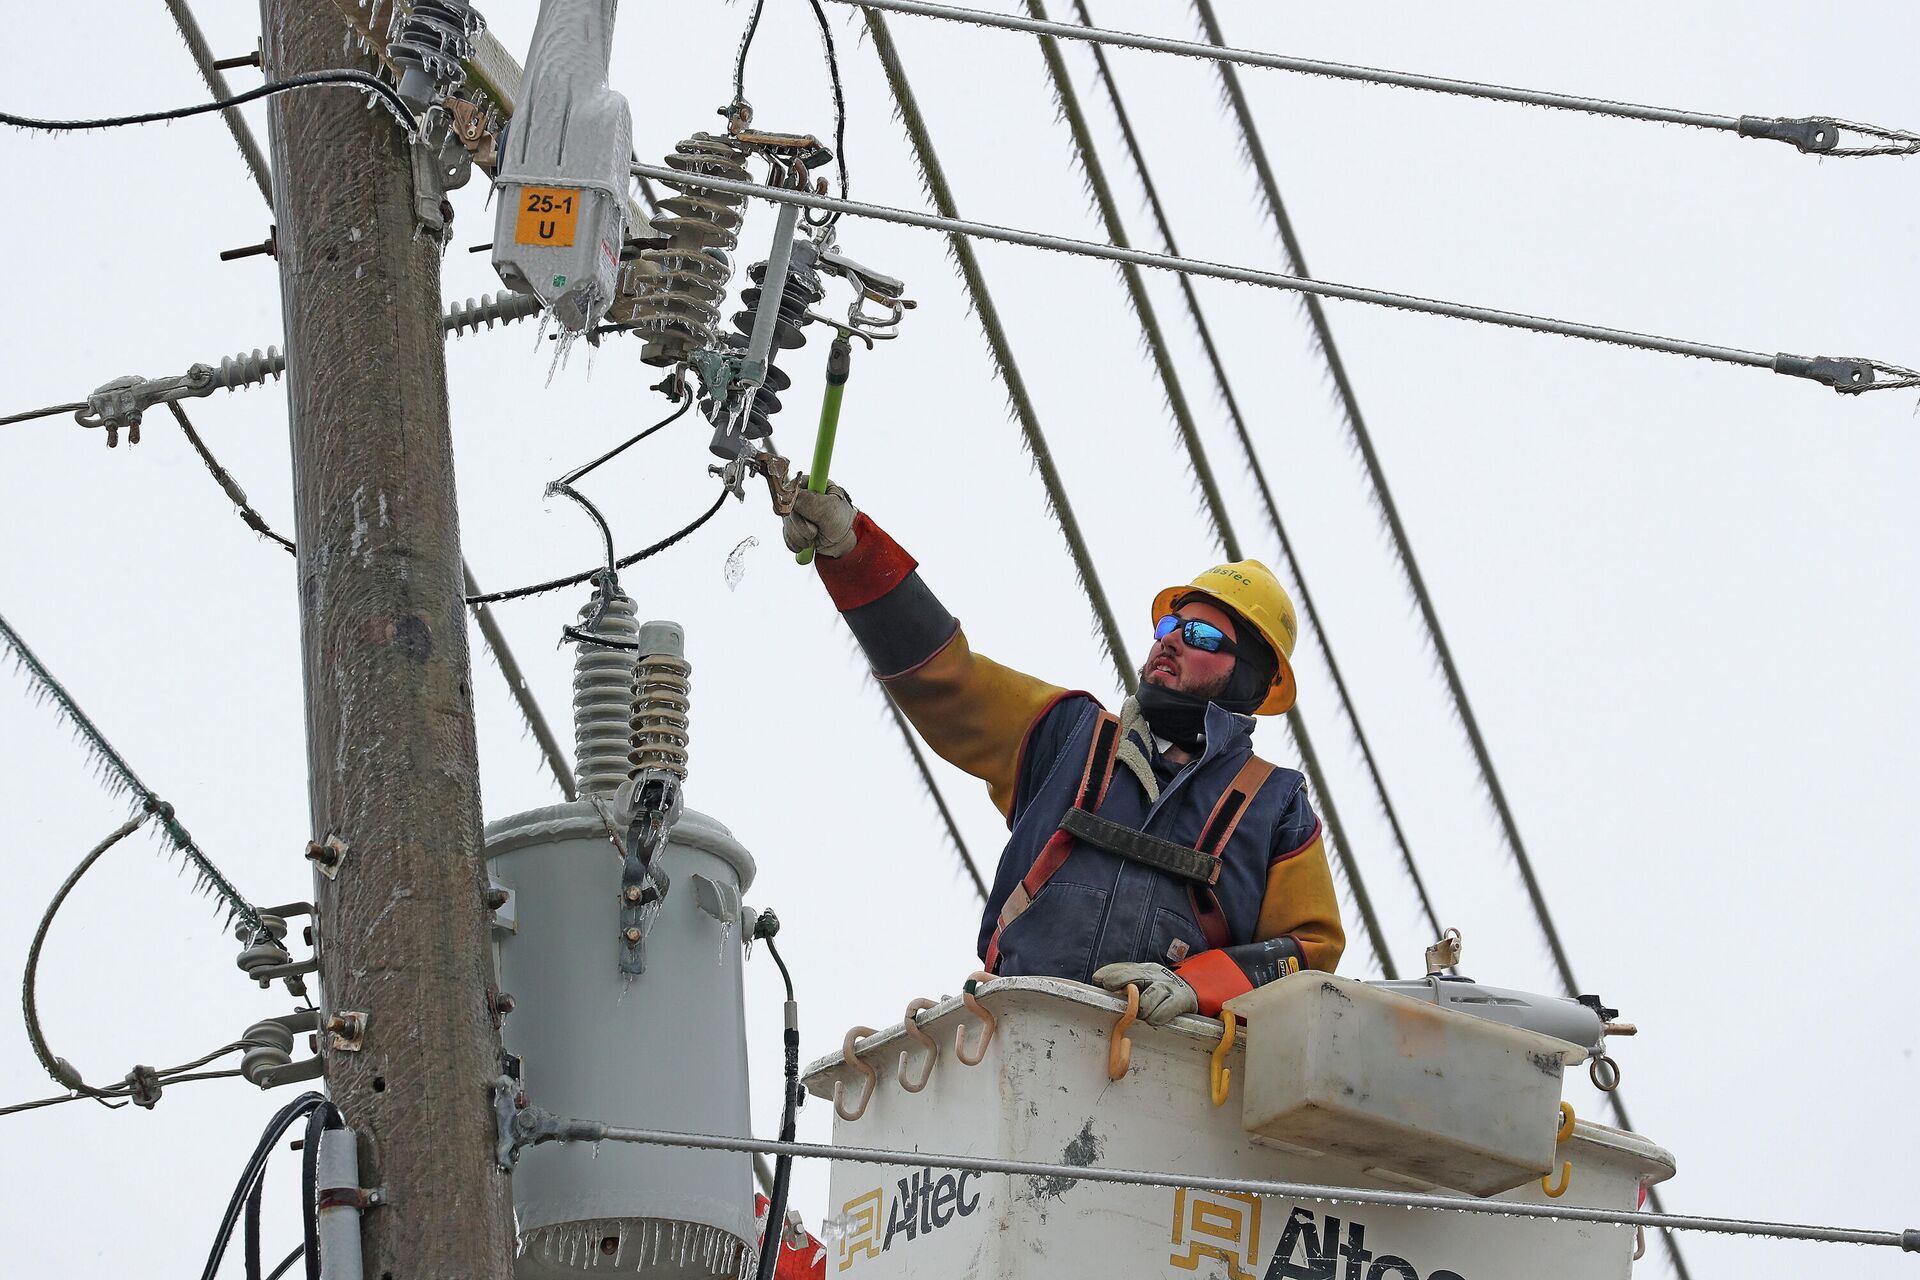 Mike Raniolo with MasTec a contractor for Duke Power breaks ice on power lines after a winter storm hit North Carolina in Atlantic Beach, N.C. on Saturday, Jan. 22, 2022 - Sputnik International, 1920, 22.01.2022